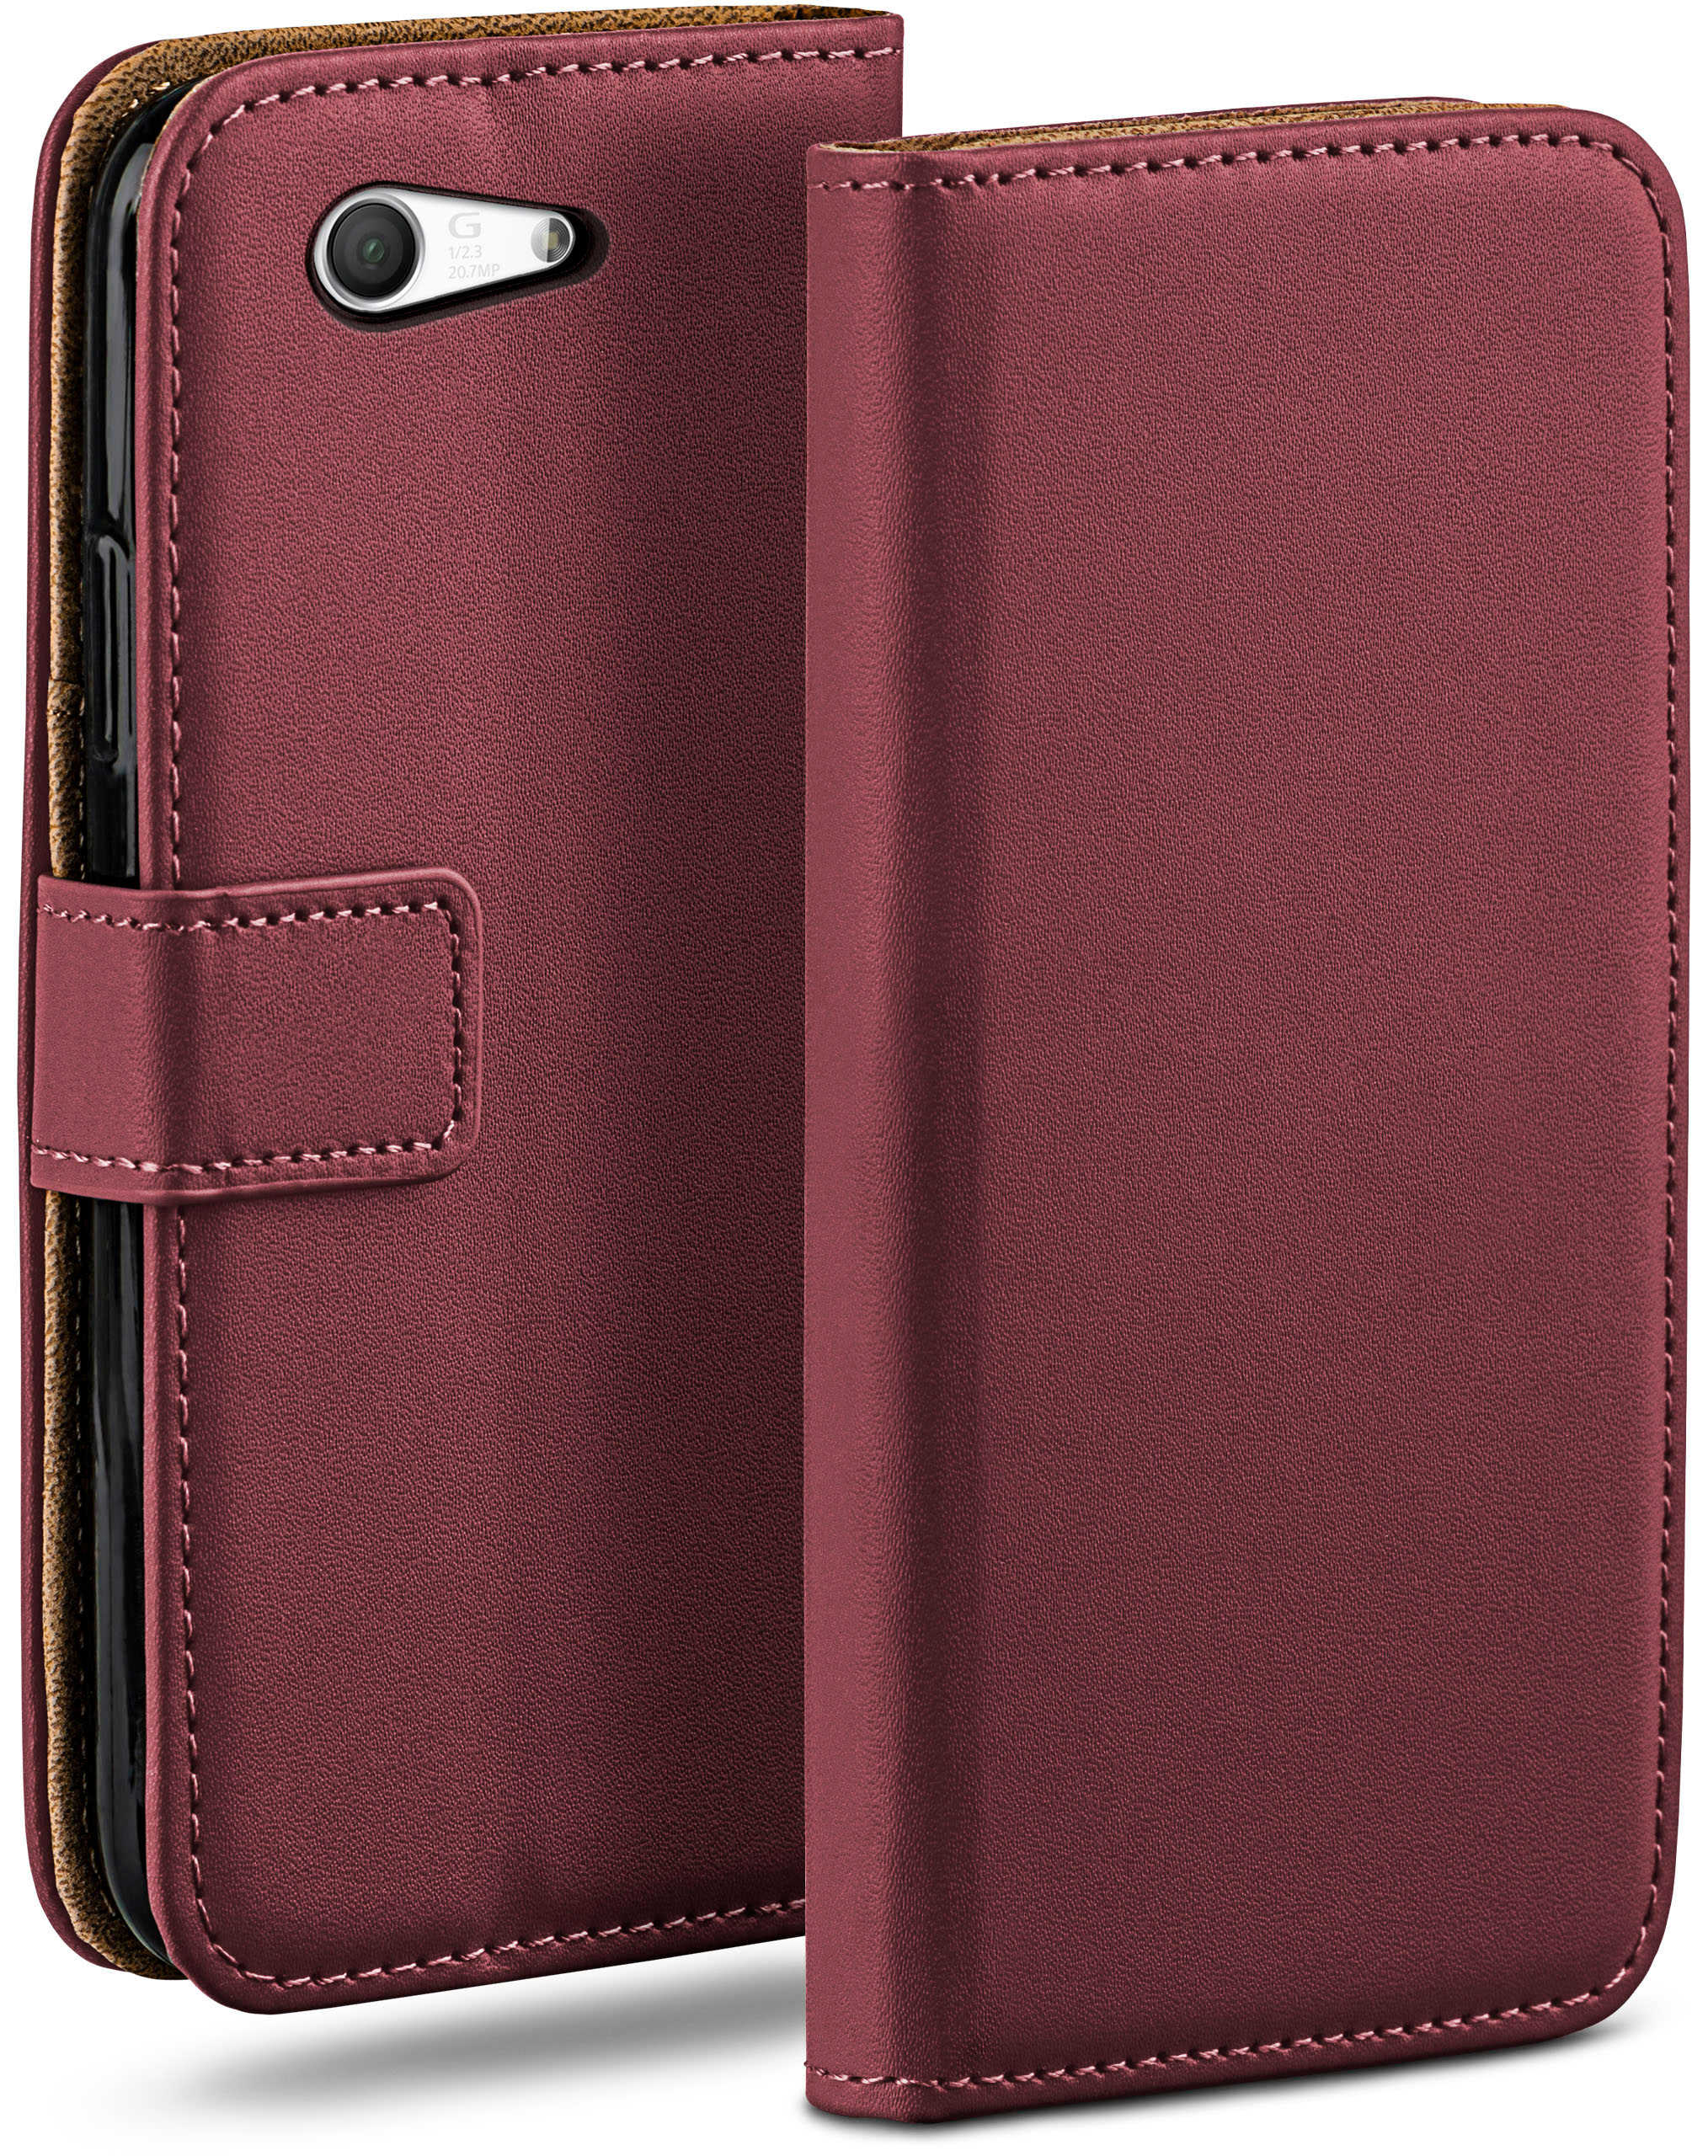 MOEX Book Case, Compact, Bookcover, Xperia Z3 Sony, Maroon-Red